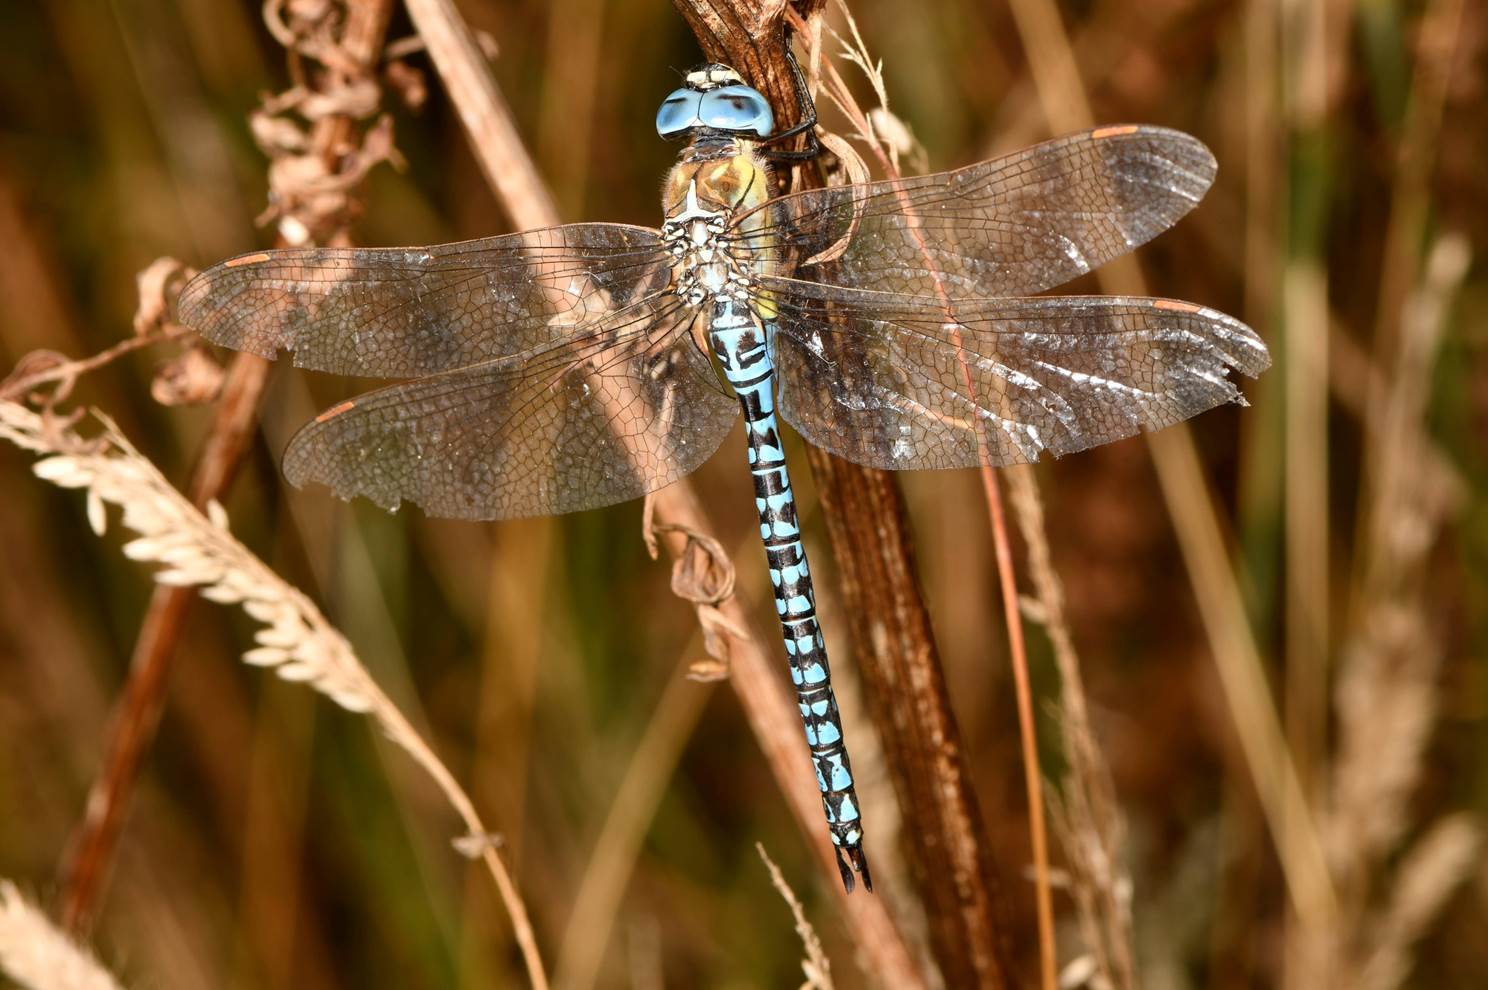 A dragonfly on a plant

Description automatically generated